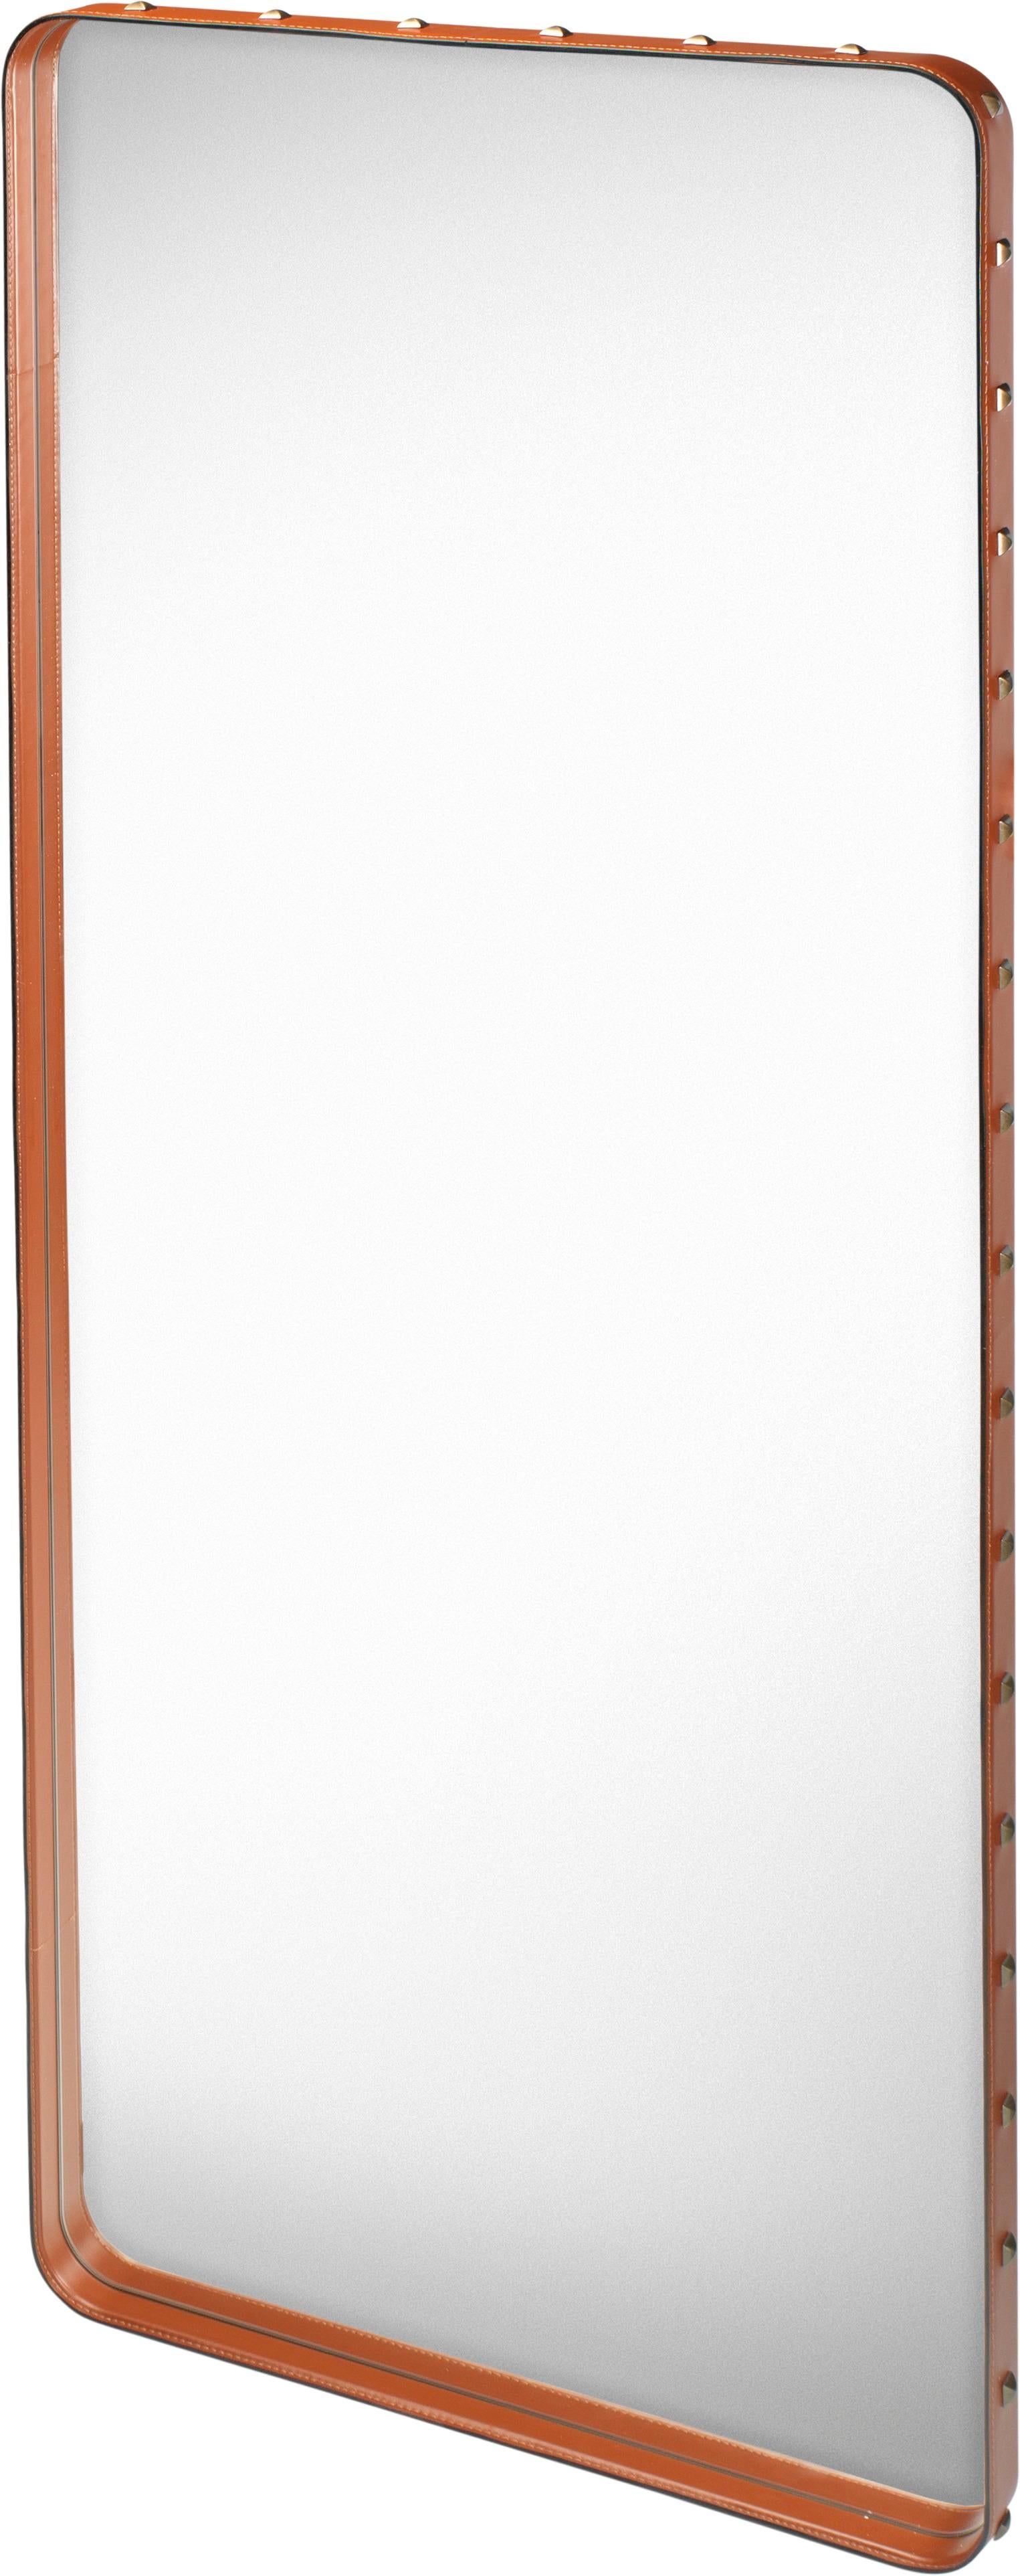 Large Jacques Adnet 'Rectangulaire' wall mirror in tan leather for GUBI. Originally designed by Jacques Adnet in the 1950s, this incredibly refined mirror is executed in high quality tan aniline leather and studded with burnished brass rivets on the